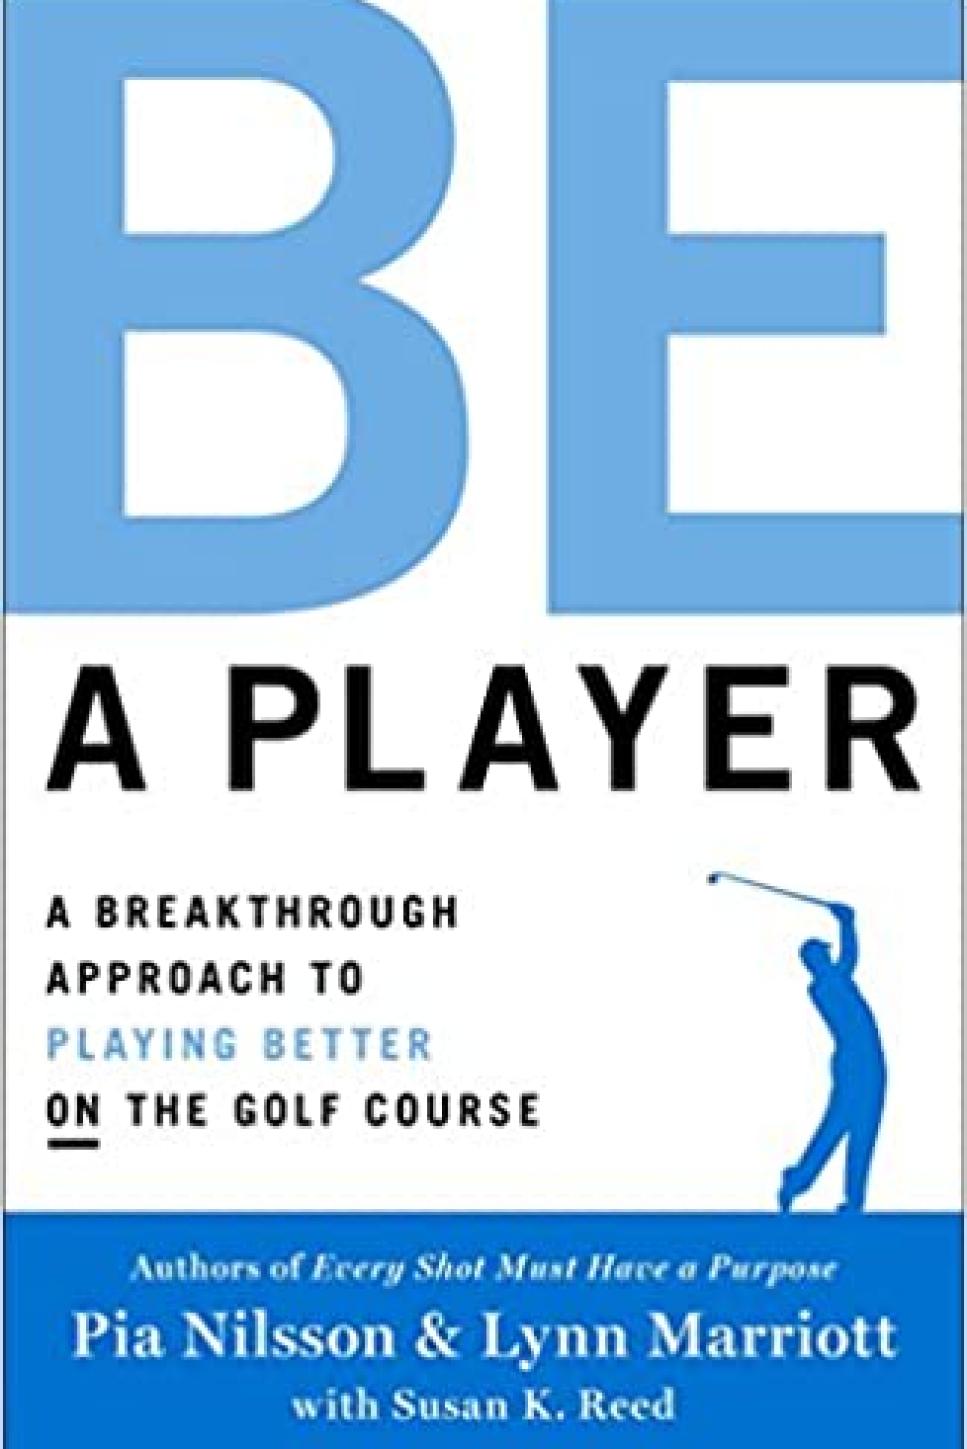 rx-amazonbe-a-player-a-breakthrough-approach-to-playing-better-on-the-golf-course-by-pia-nilsson.jpeg